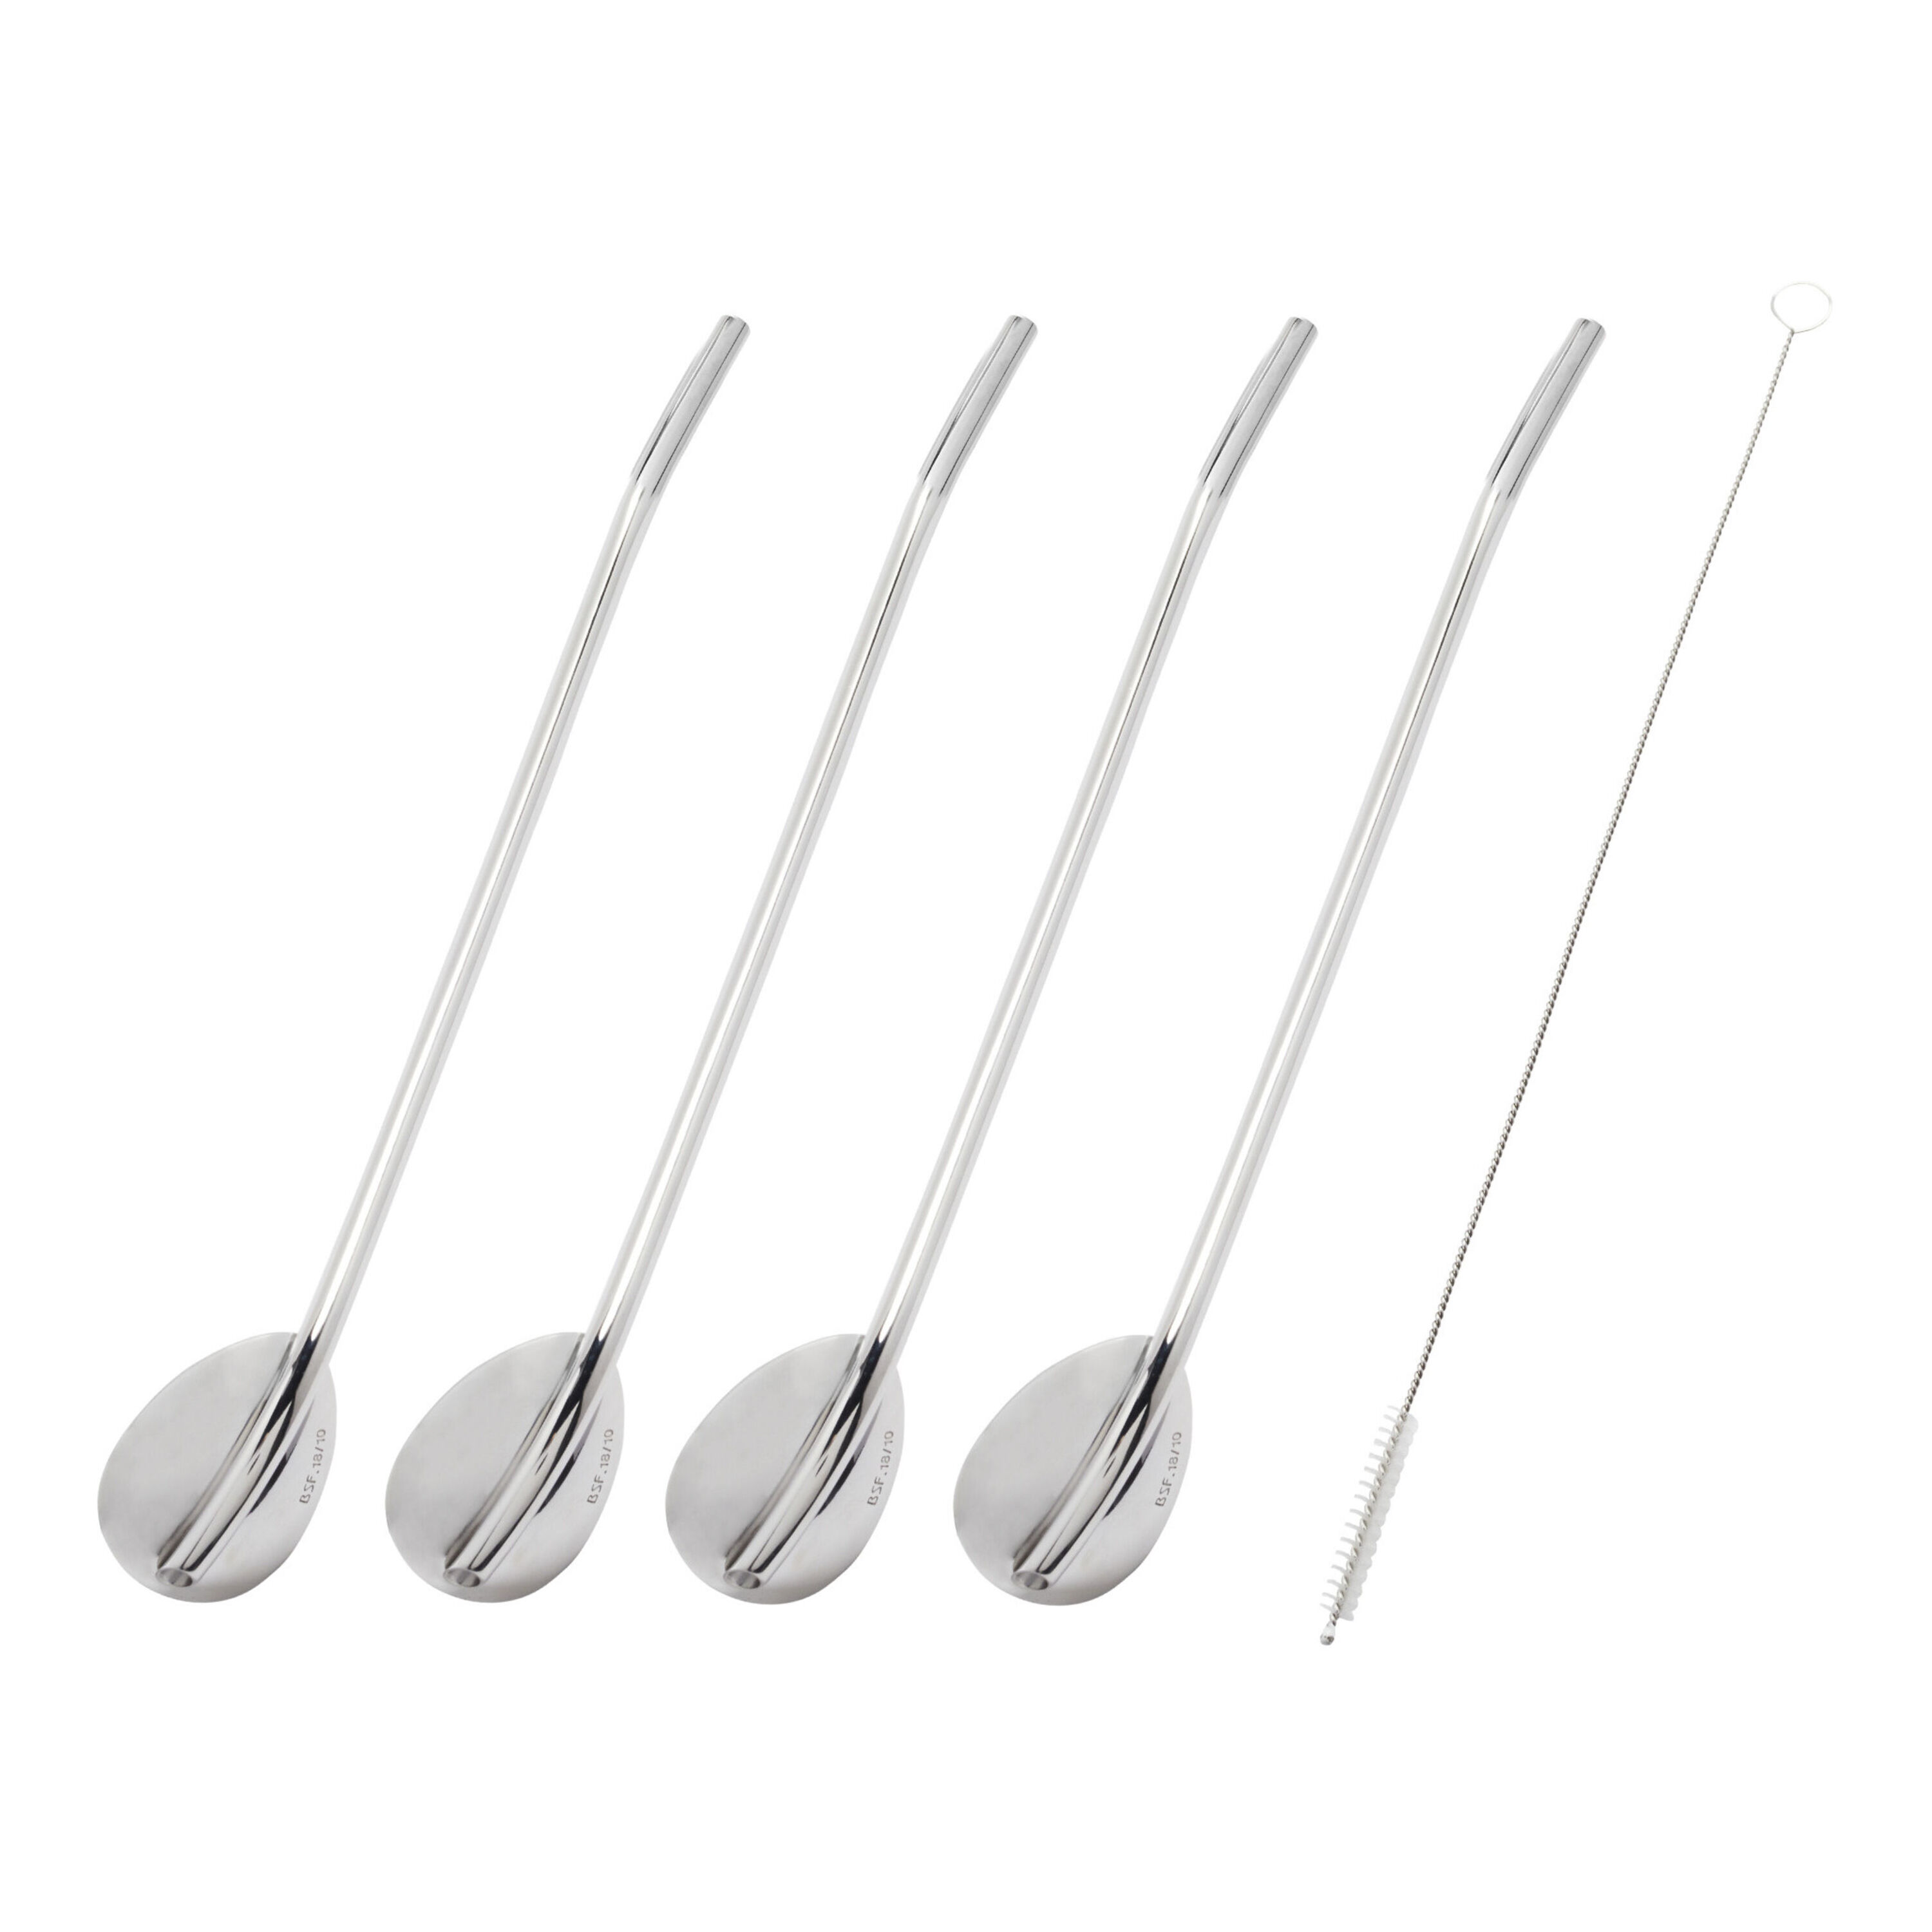 Reusable Straws with Cleaning Brush (5 pc set)